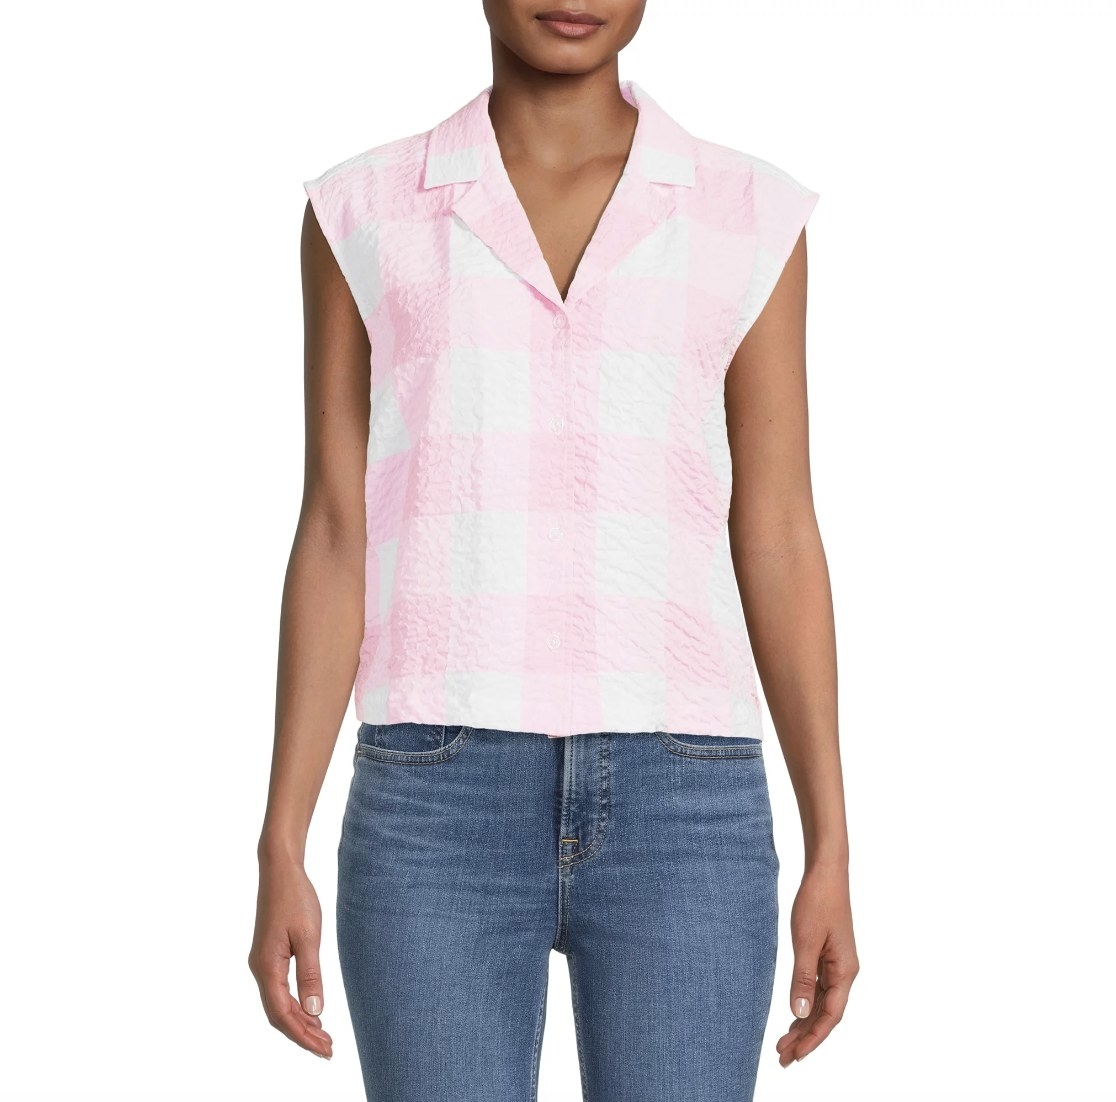 A pink button down gingham top